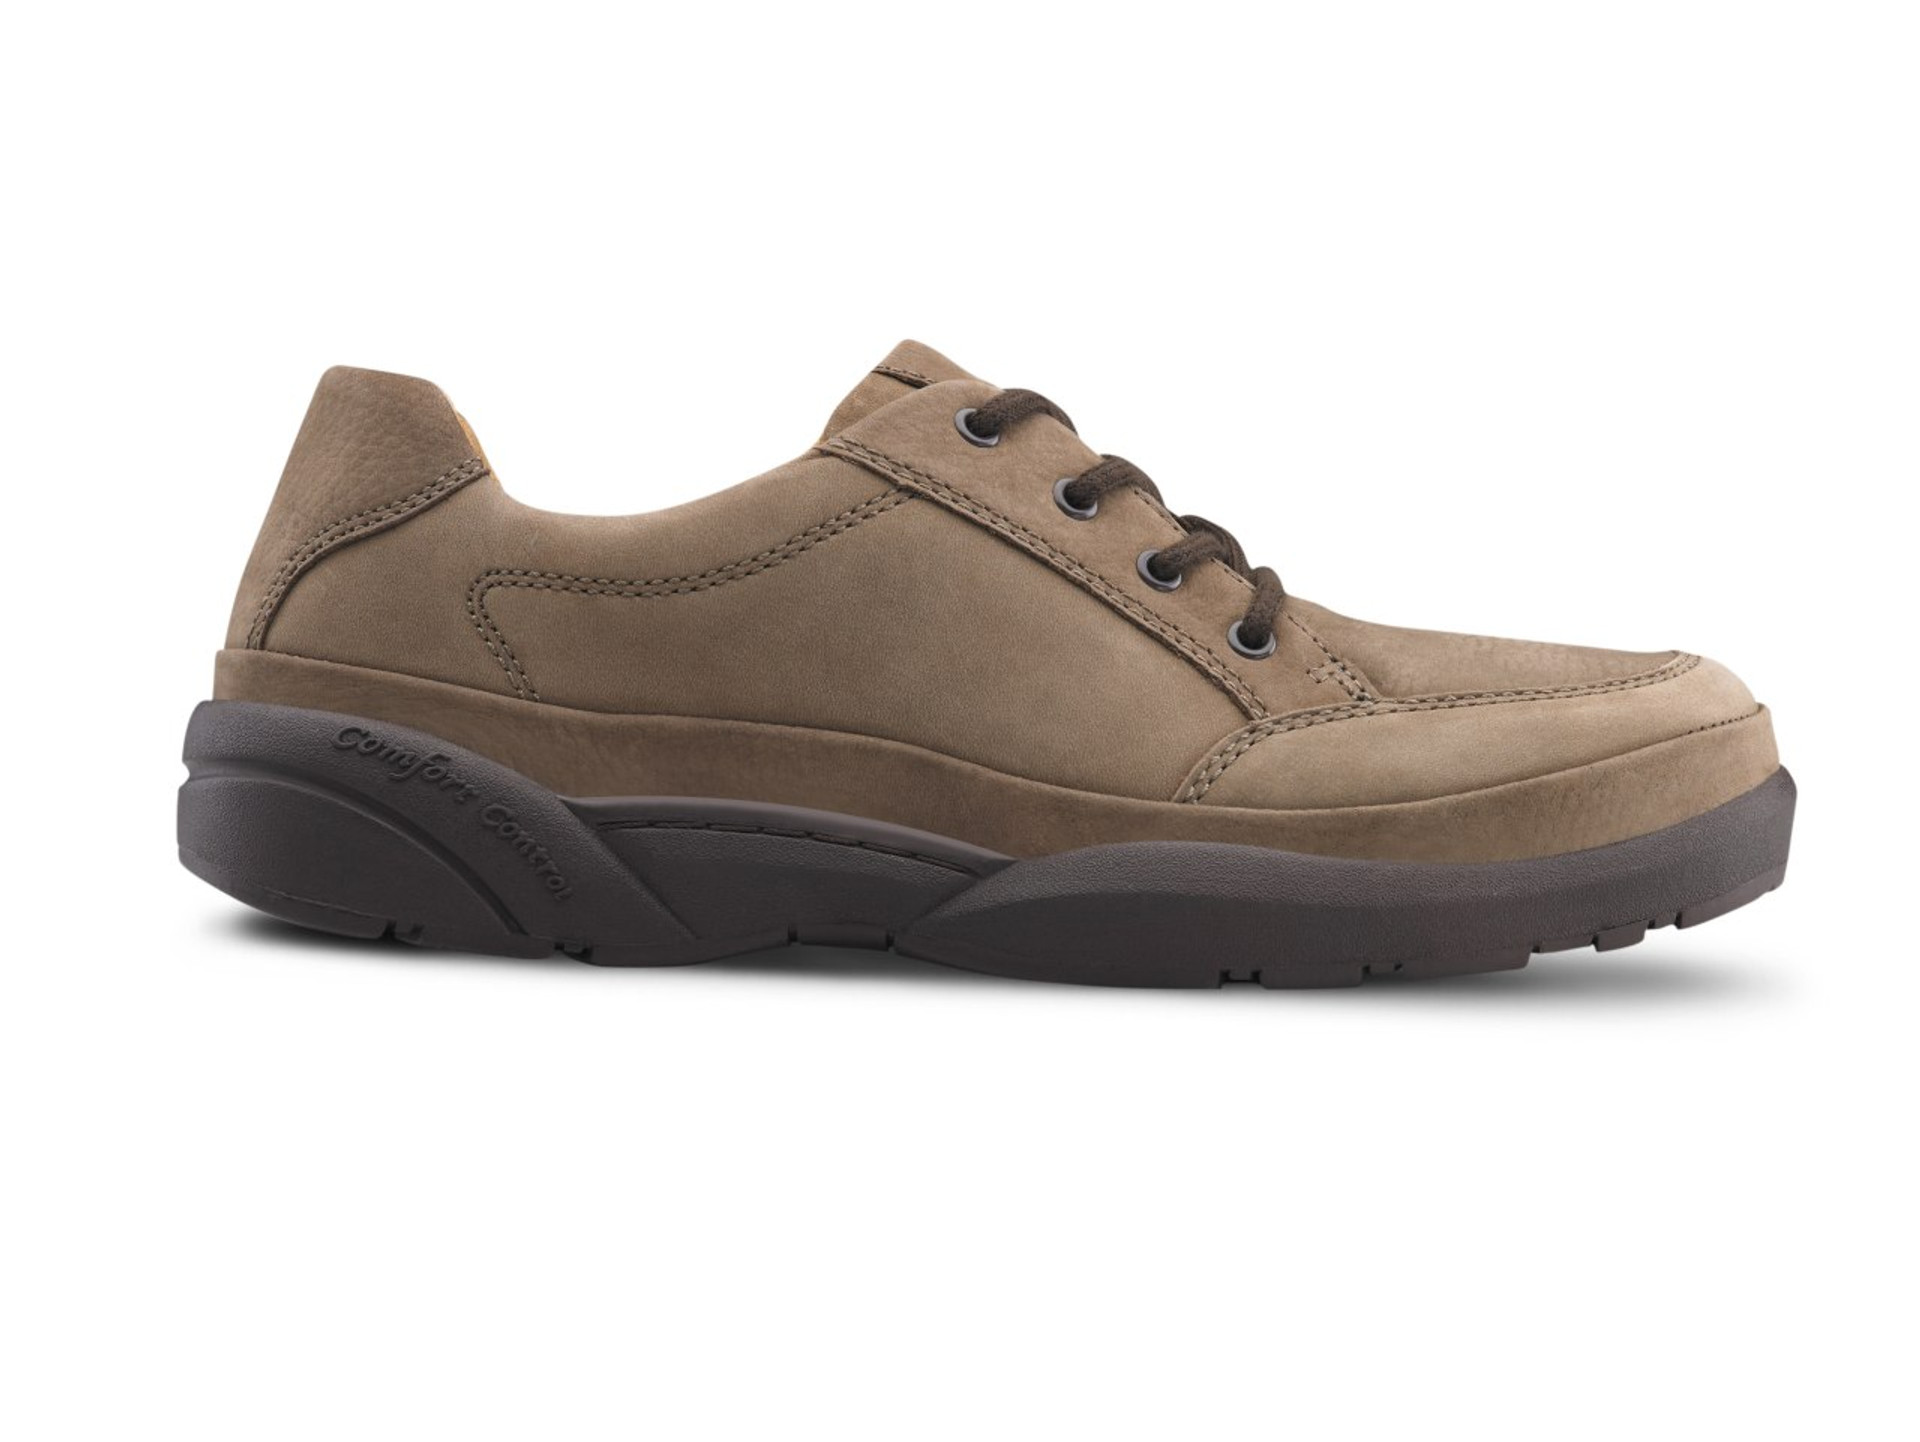 Dr. Comfort Justin Men's Casual Shoe - Free Shipping